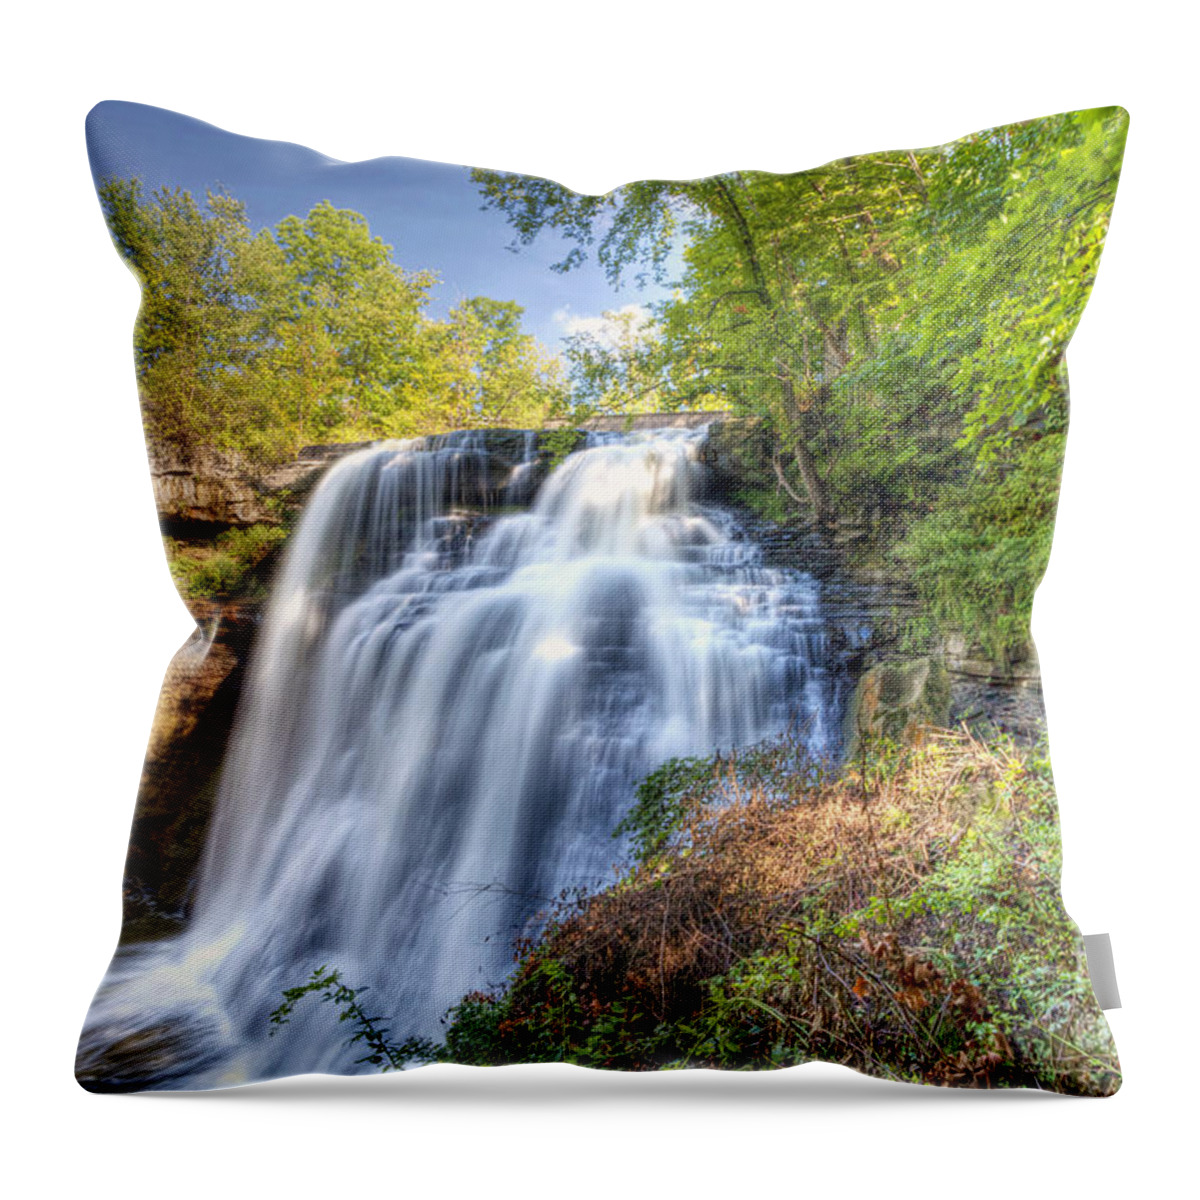 Cuyahoga Throw Pillow featuring the photograph 0302 Cuyahoga Valley National Park Brandywine Falls by Steve Sturgill